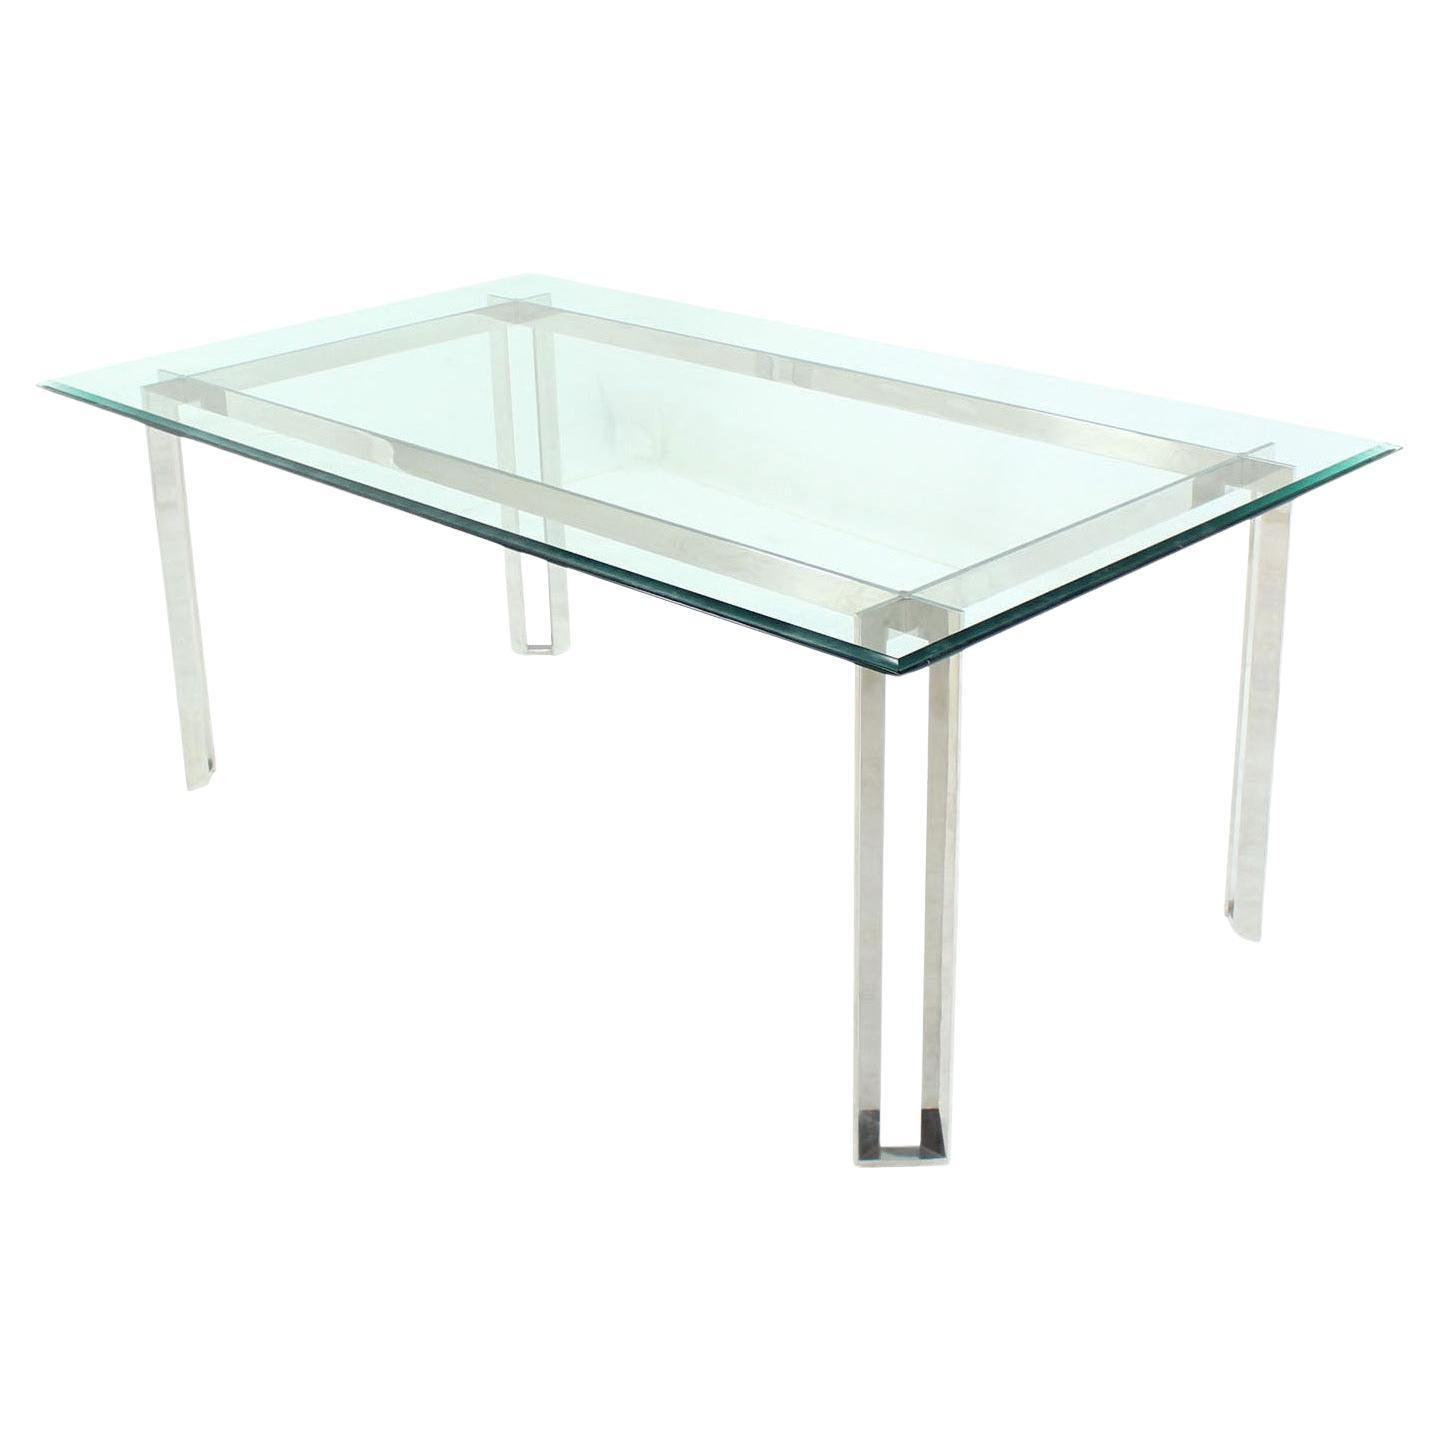 Polished Stainless Steel Base  Thick Glass Top Dining Room Table Mid Century  For Sale